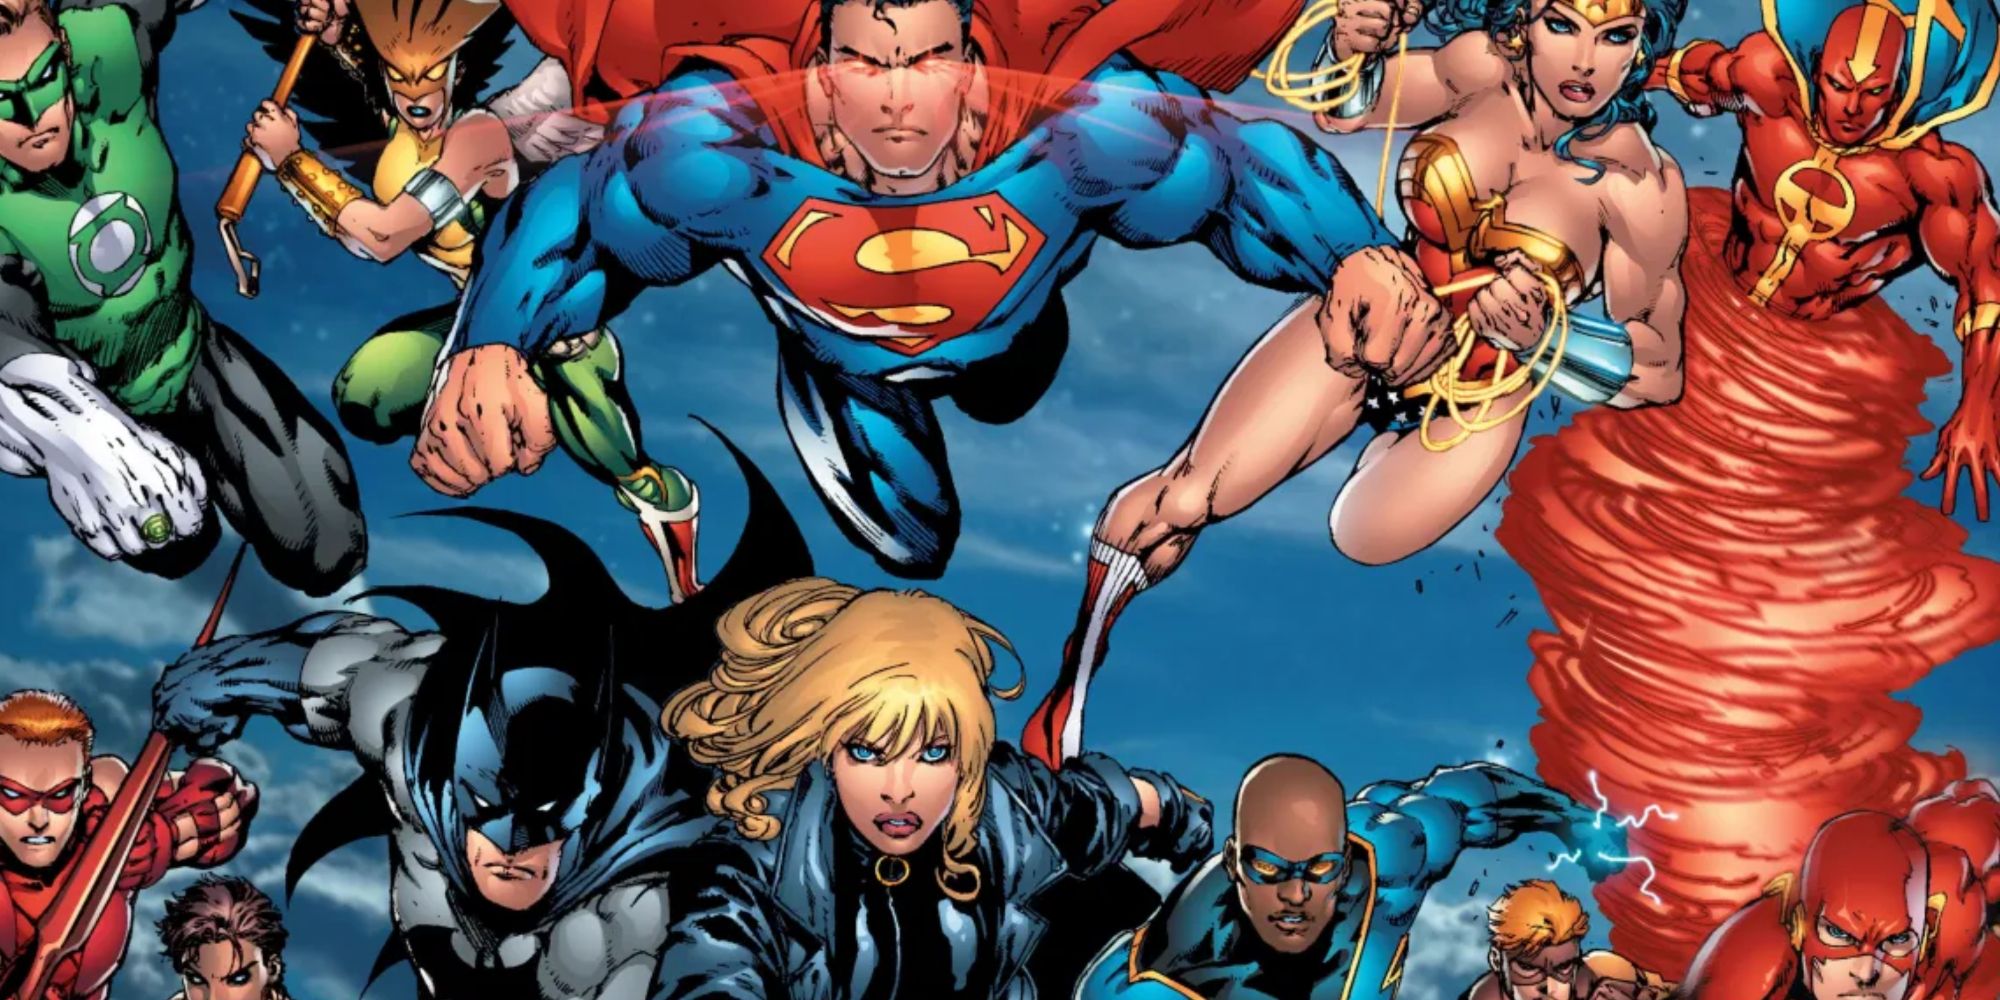 Black Canary's JLA team, including Superman, Wonder Woman, Batman, and others from DC Comics